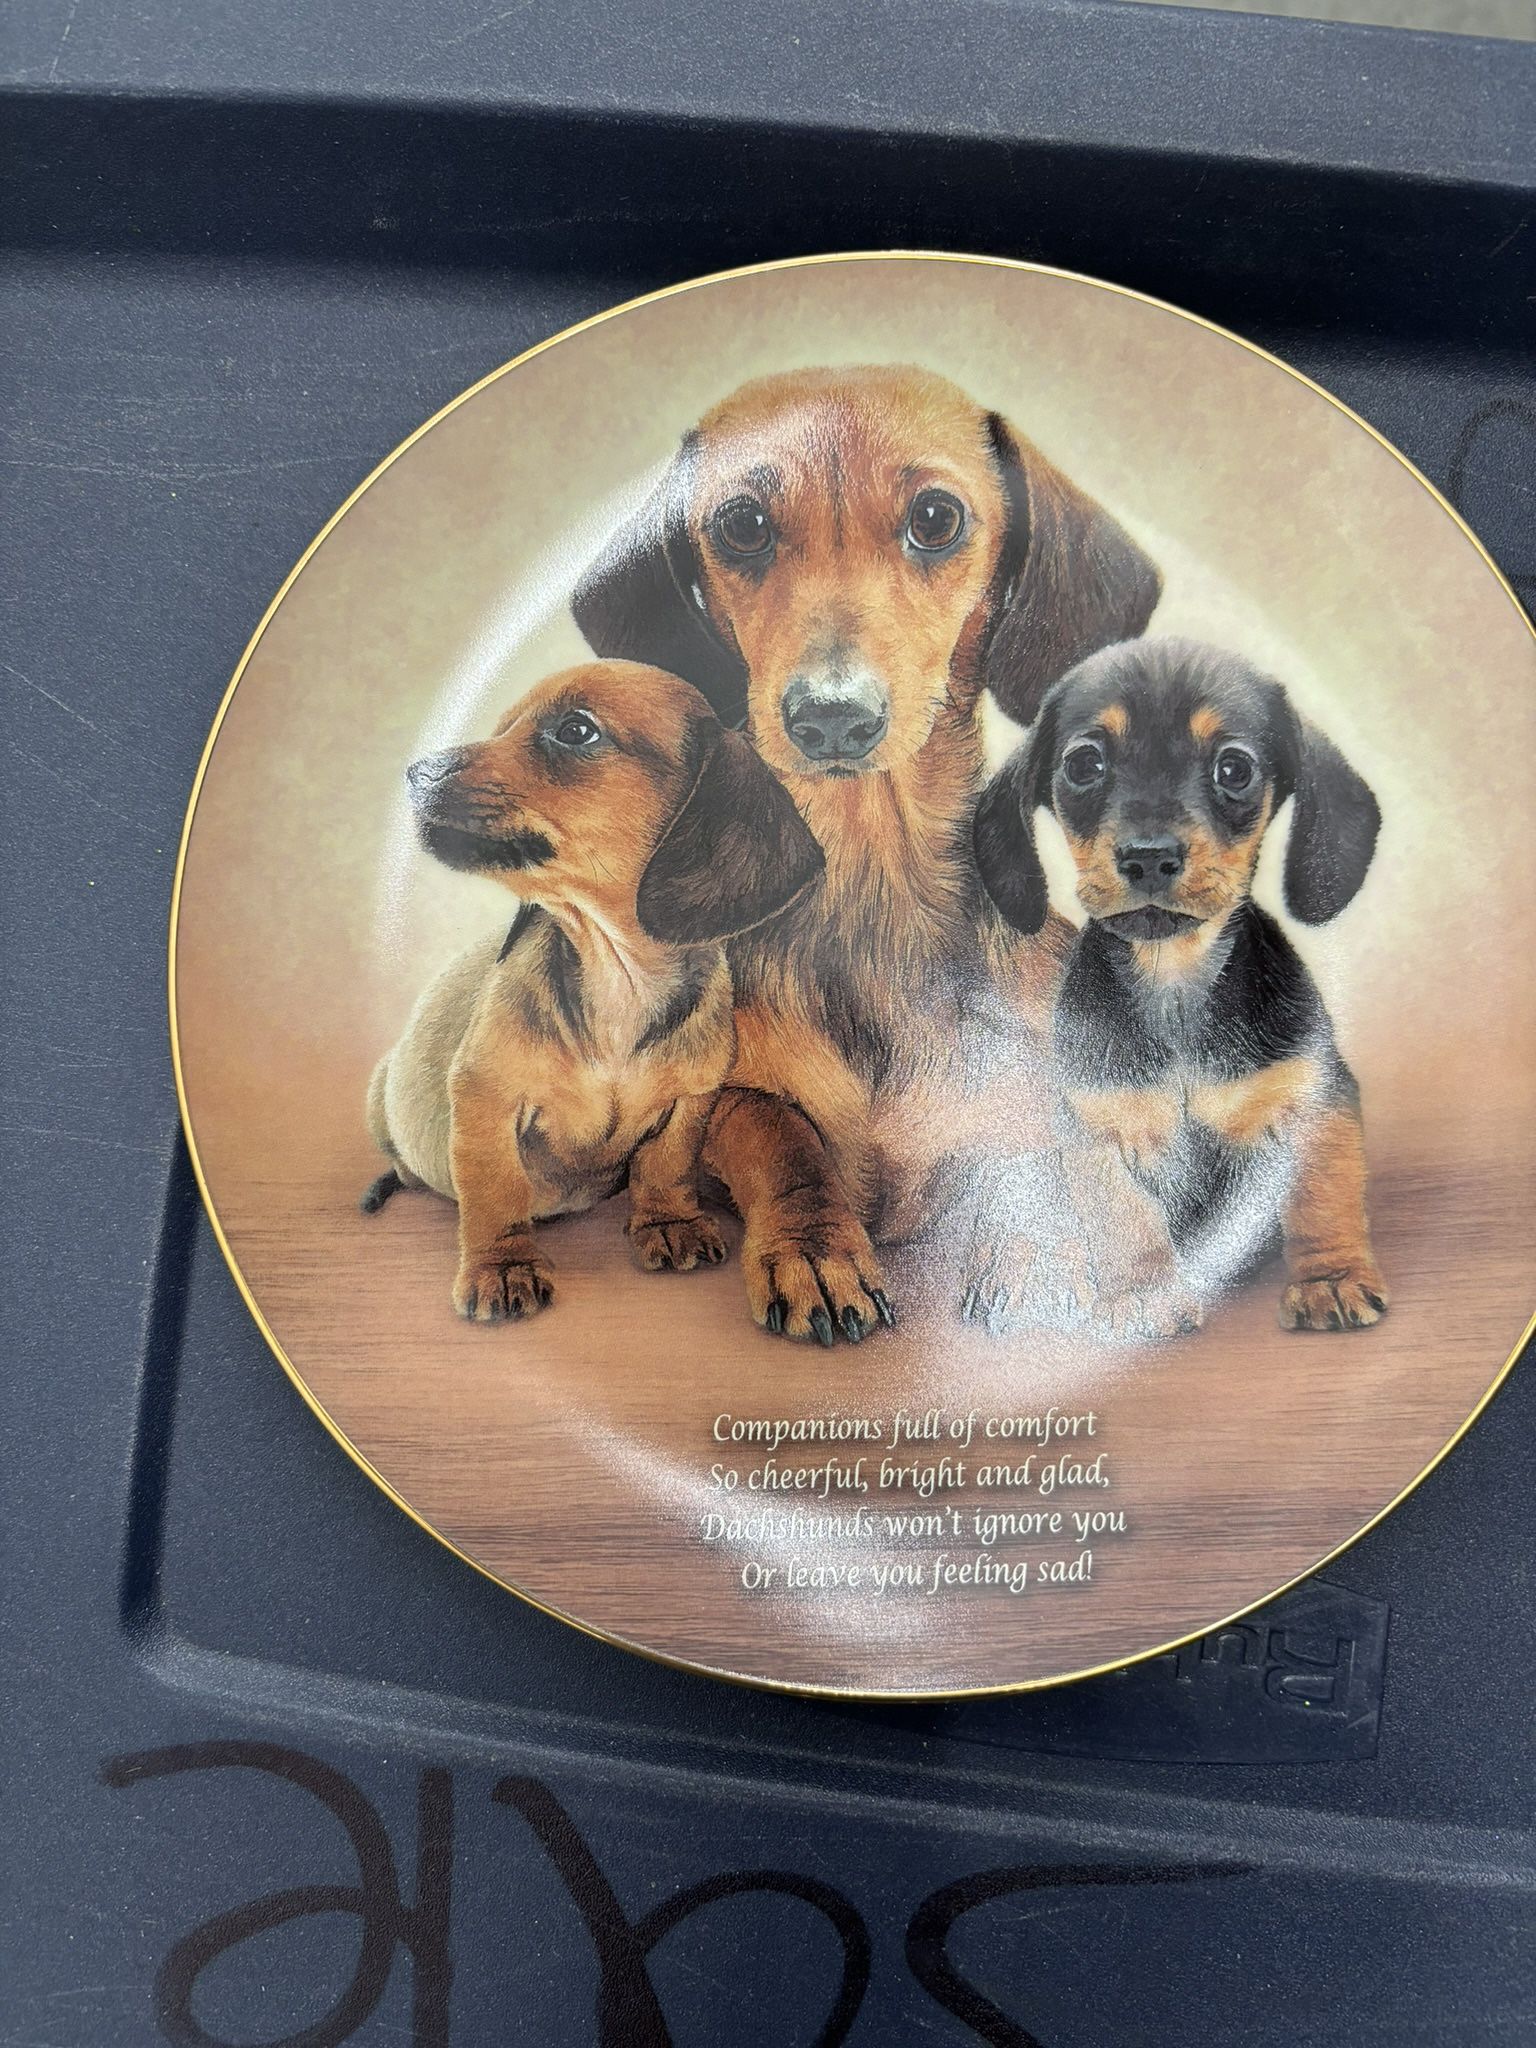  Danbury Mint Limited Edition Collection “ Cherished Dachshunds “ Chins Plate “ Companions”